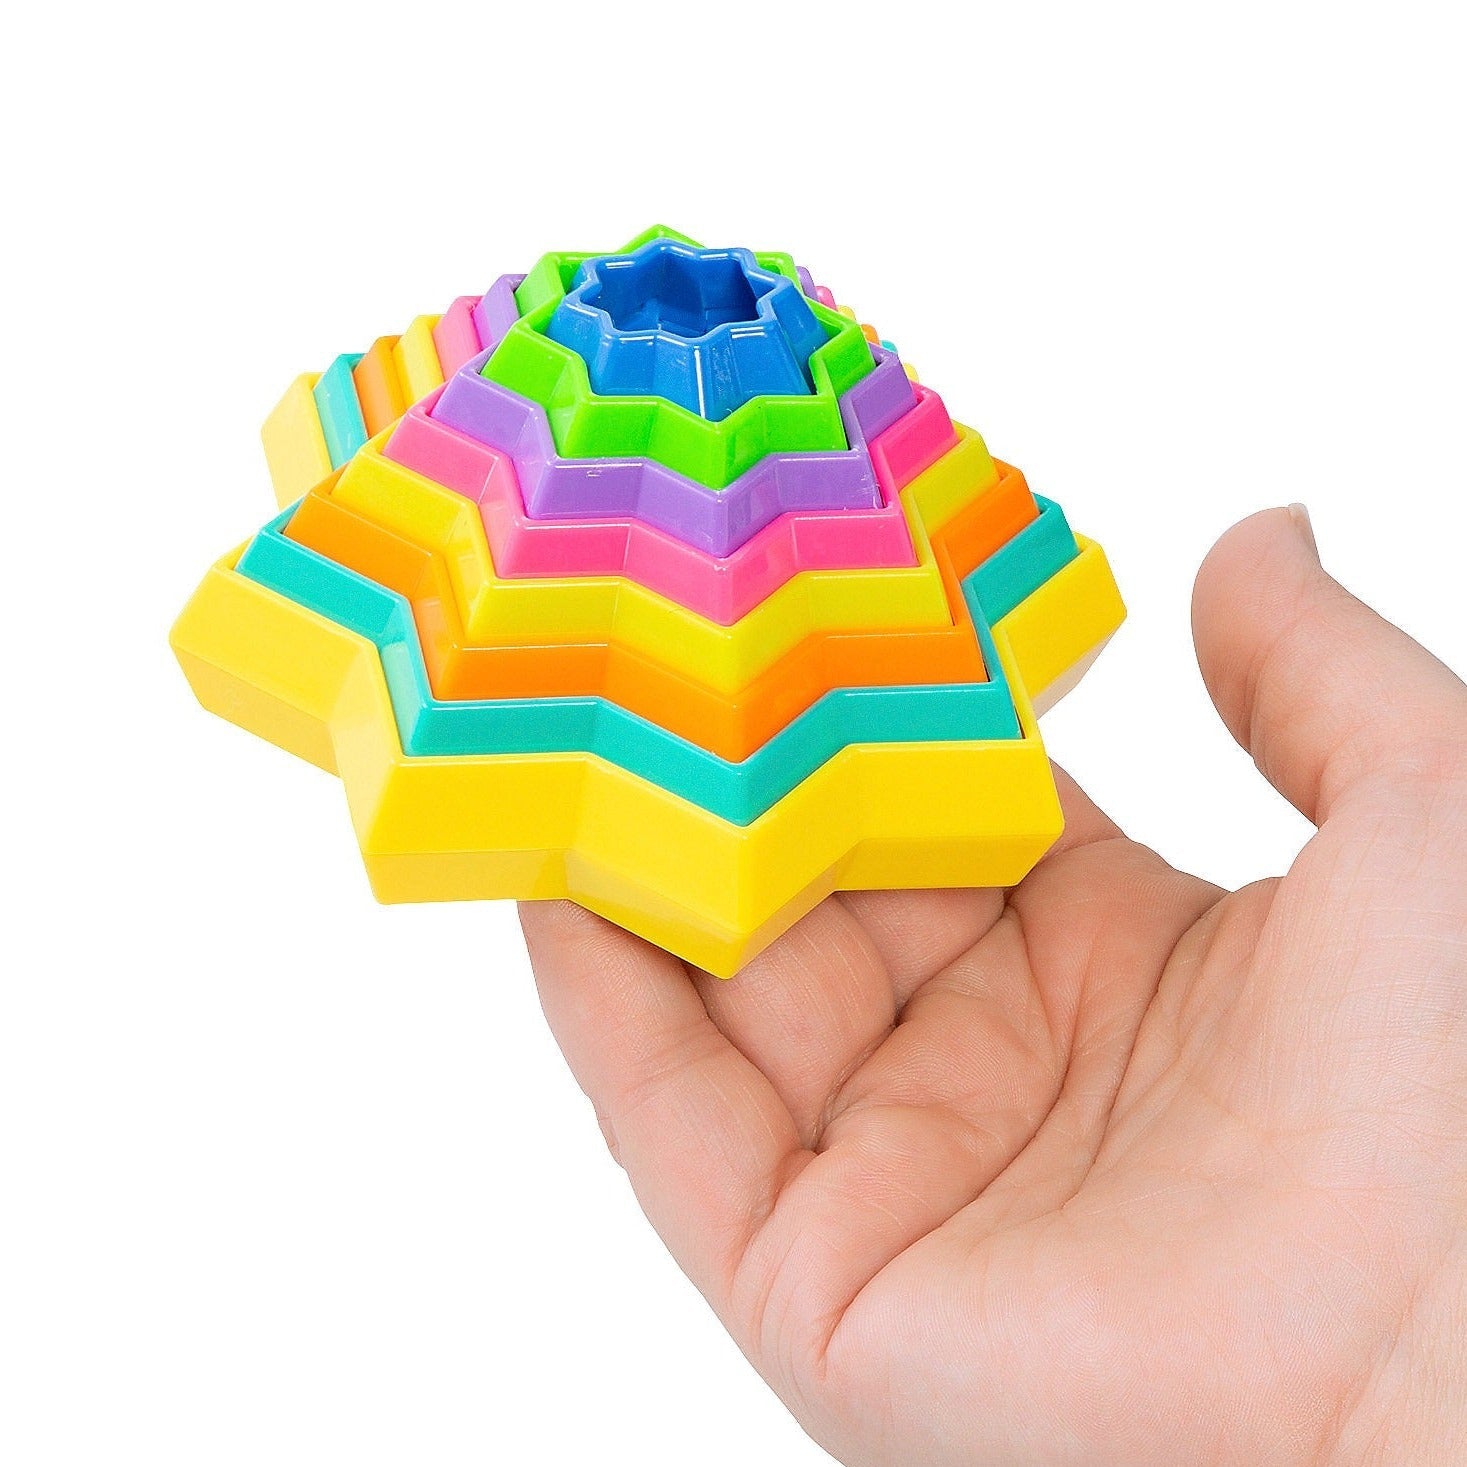 Magic Star Fidget Toy, The incredibly addictive Magic Fidget Star fidget toy folds out into a 3D pyramid shape, listen to it popping and cracking while you play with it! Magic Star Fidget Toy Product features Incredibly addictive fold-out star with popping noises and ridged design Designed to feel comfortable in the hand Suitable for ages 3 years + Colours vary and will be picked at random atthe point of despatch., Magic Star Fidget Toy,Magic Sensory Fidget Star,Fidget Star,Sensorydirect fidget toy discount